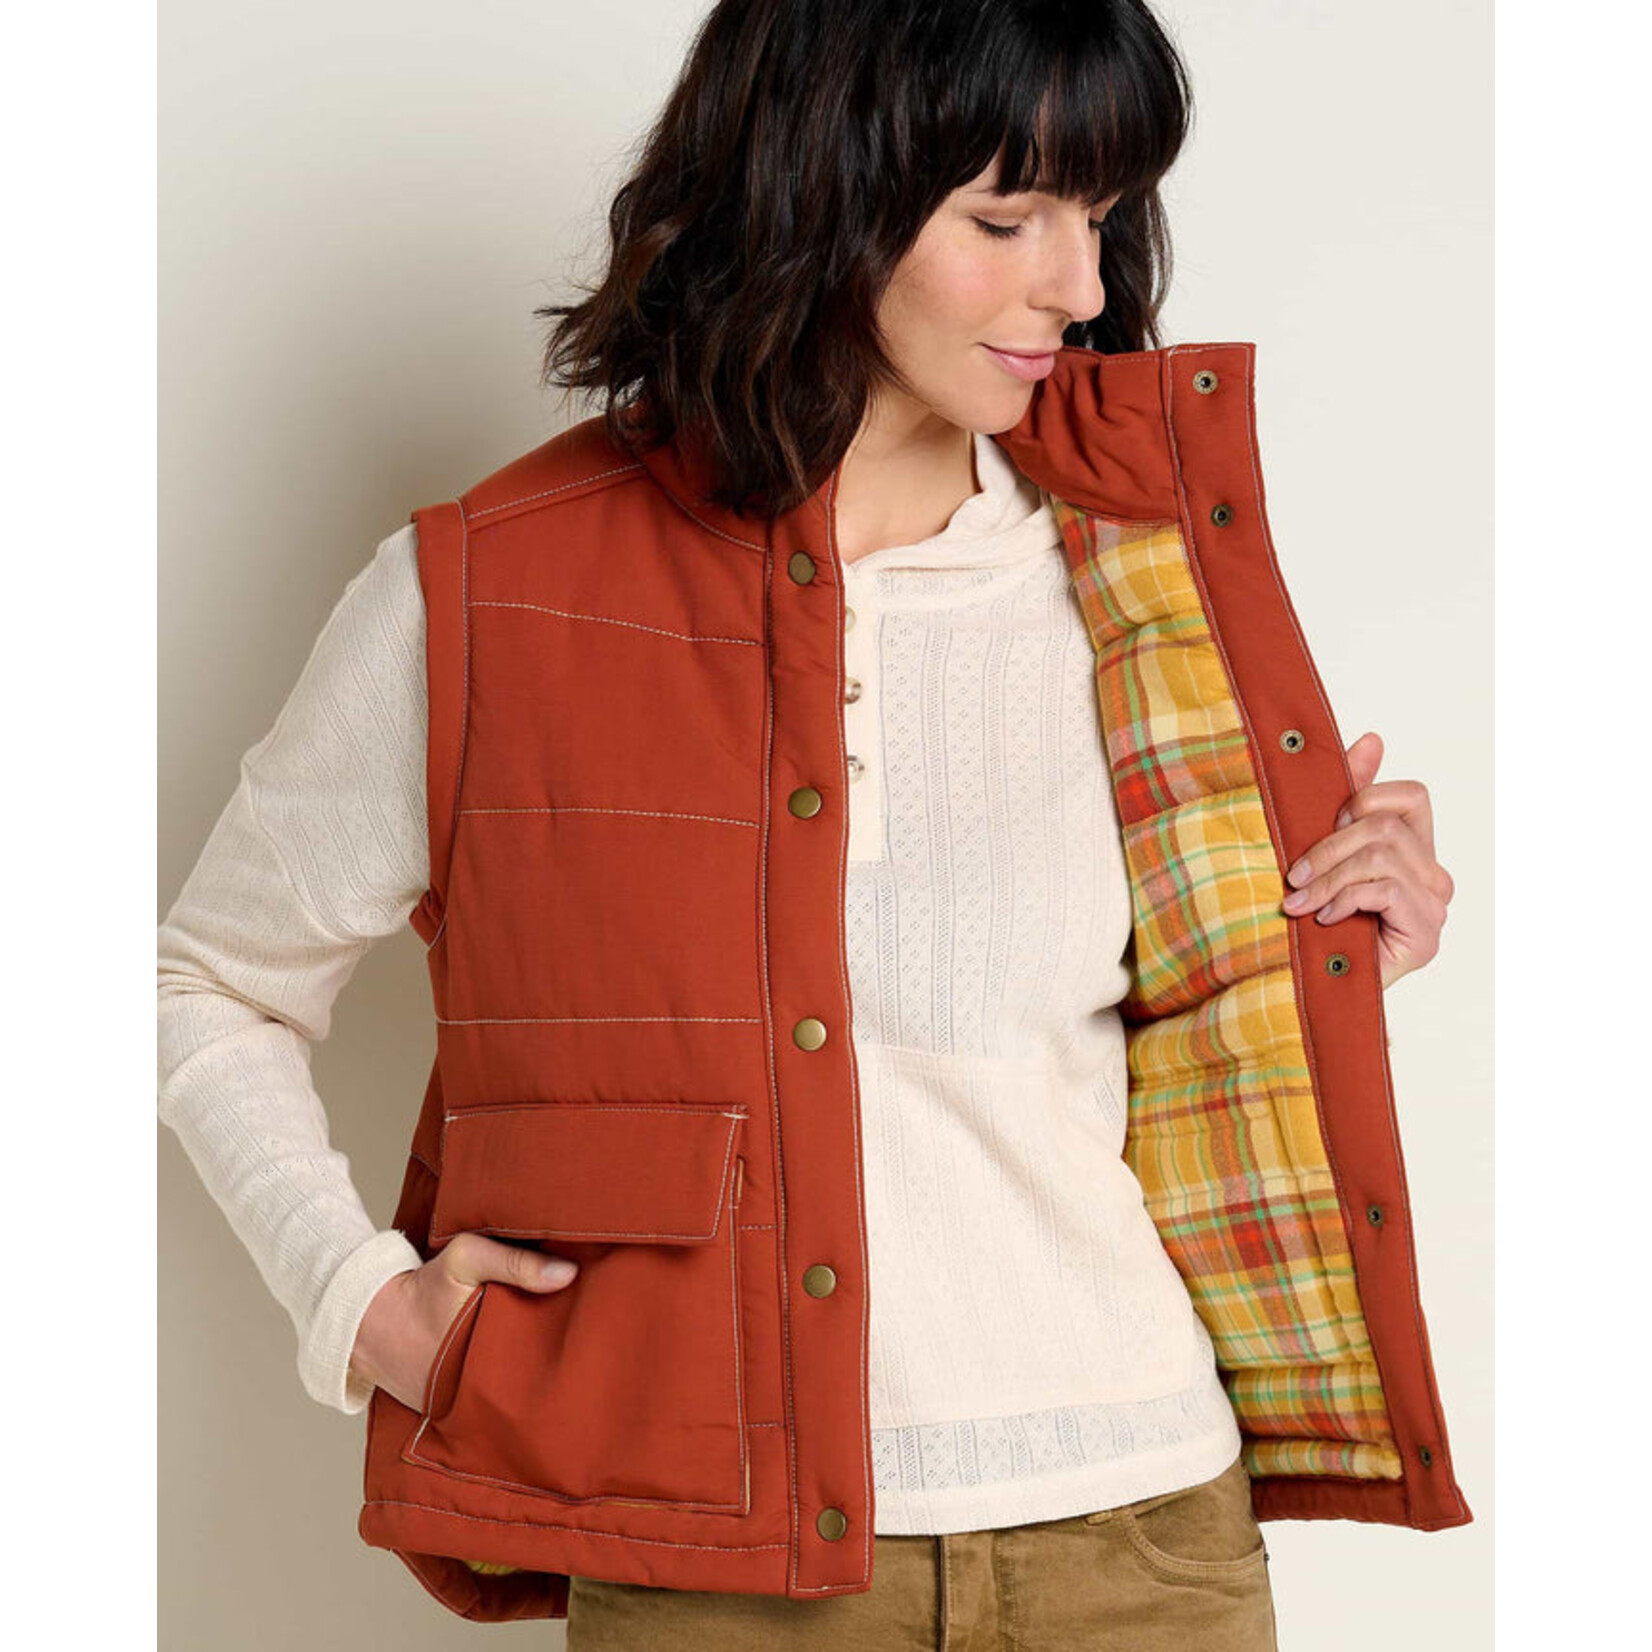 Toad & Co Women's Forester Pass Vest